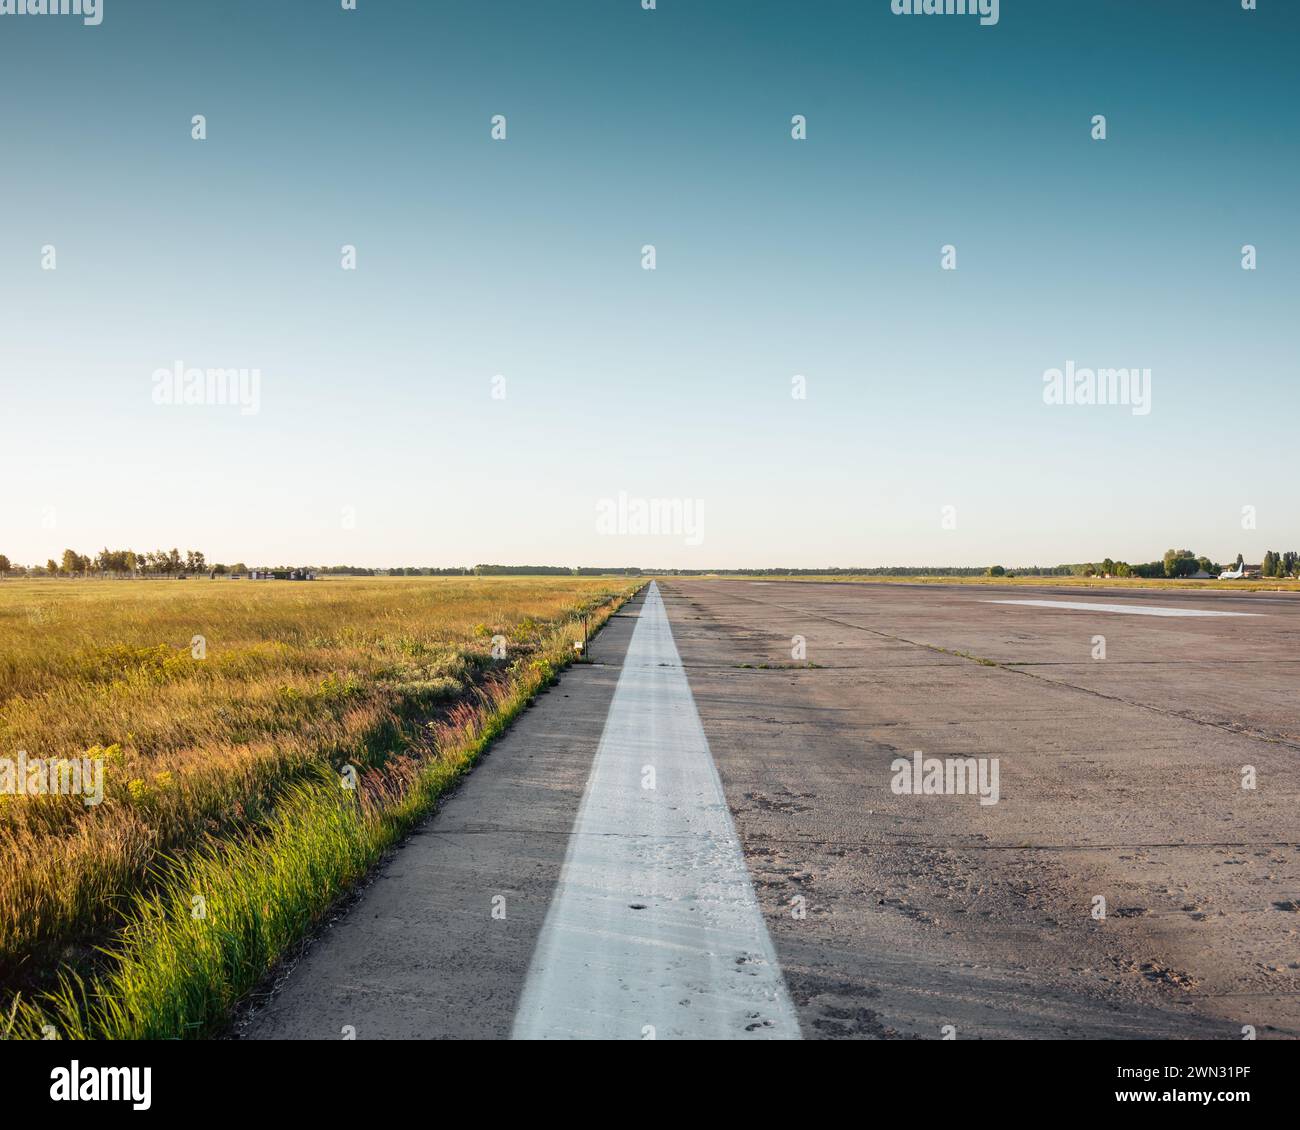 Endless white line. Road markings along the edge of airport runway. Minimalistic wide angle shot of empty airport runway at sunset - edge of runway. Stock Photo